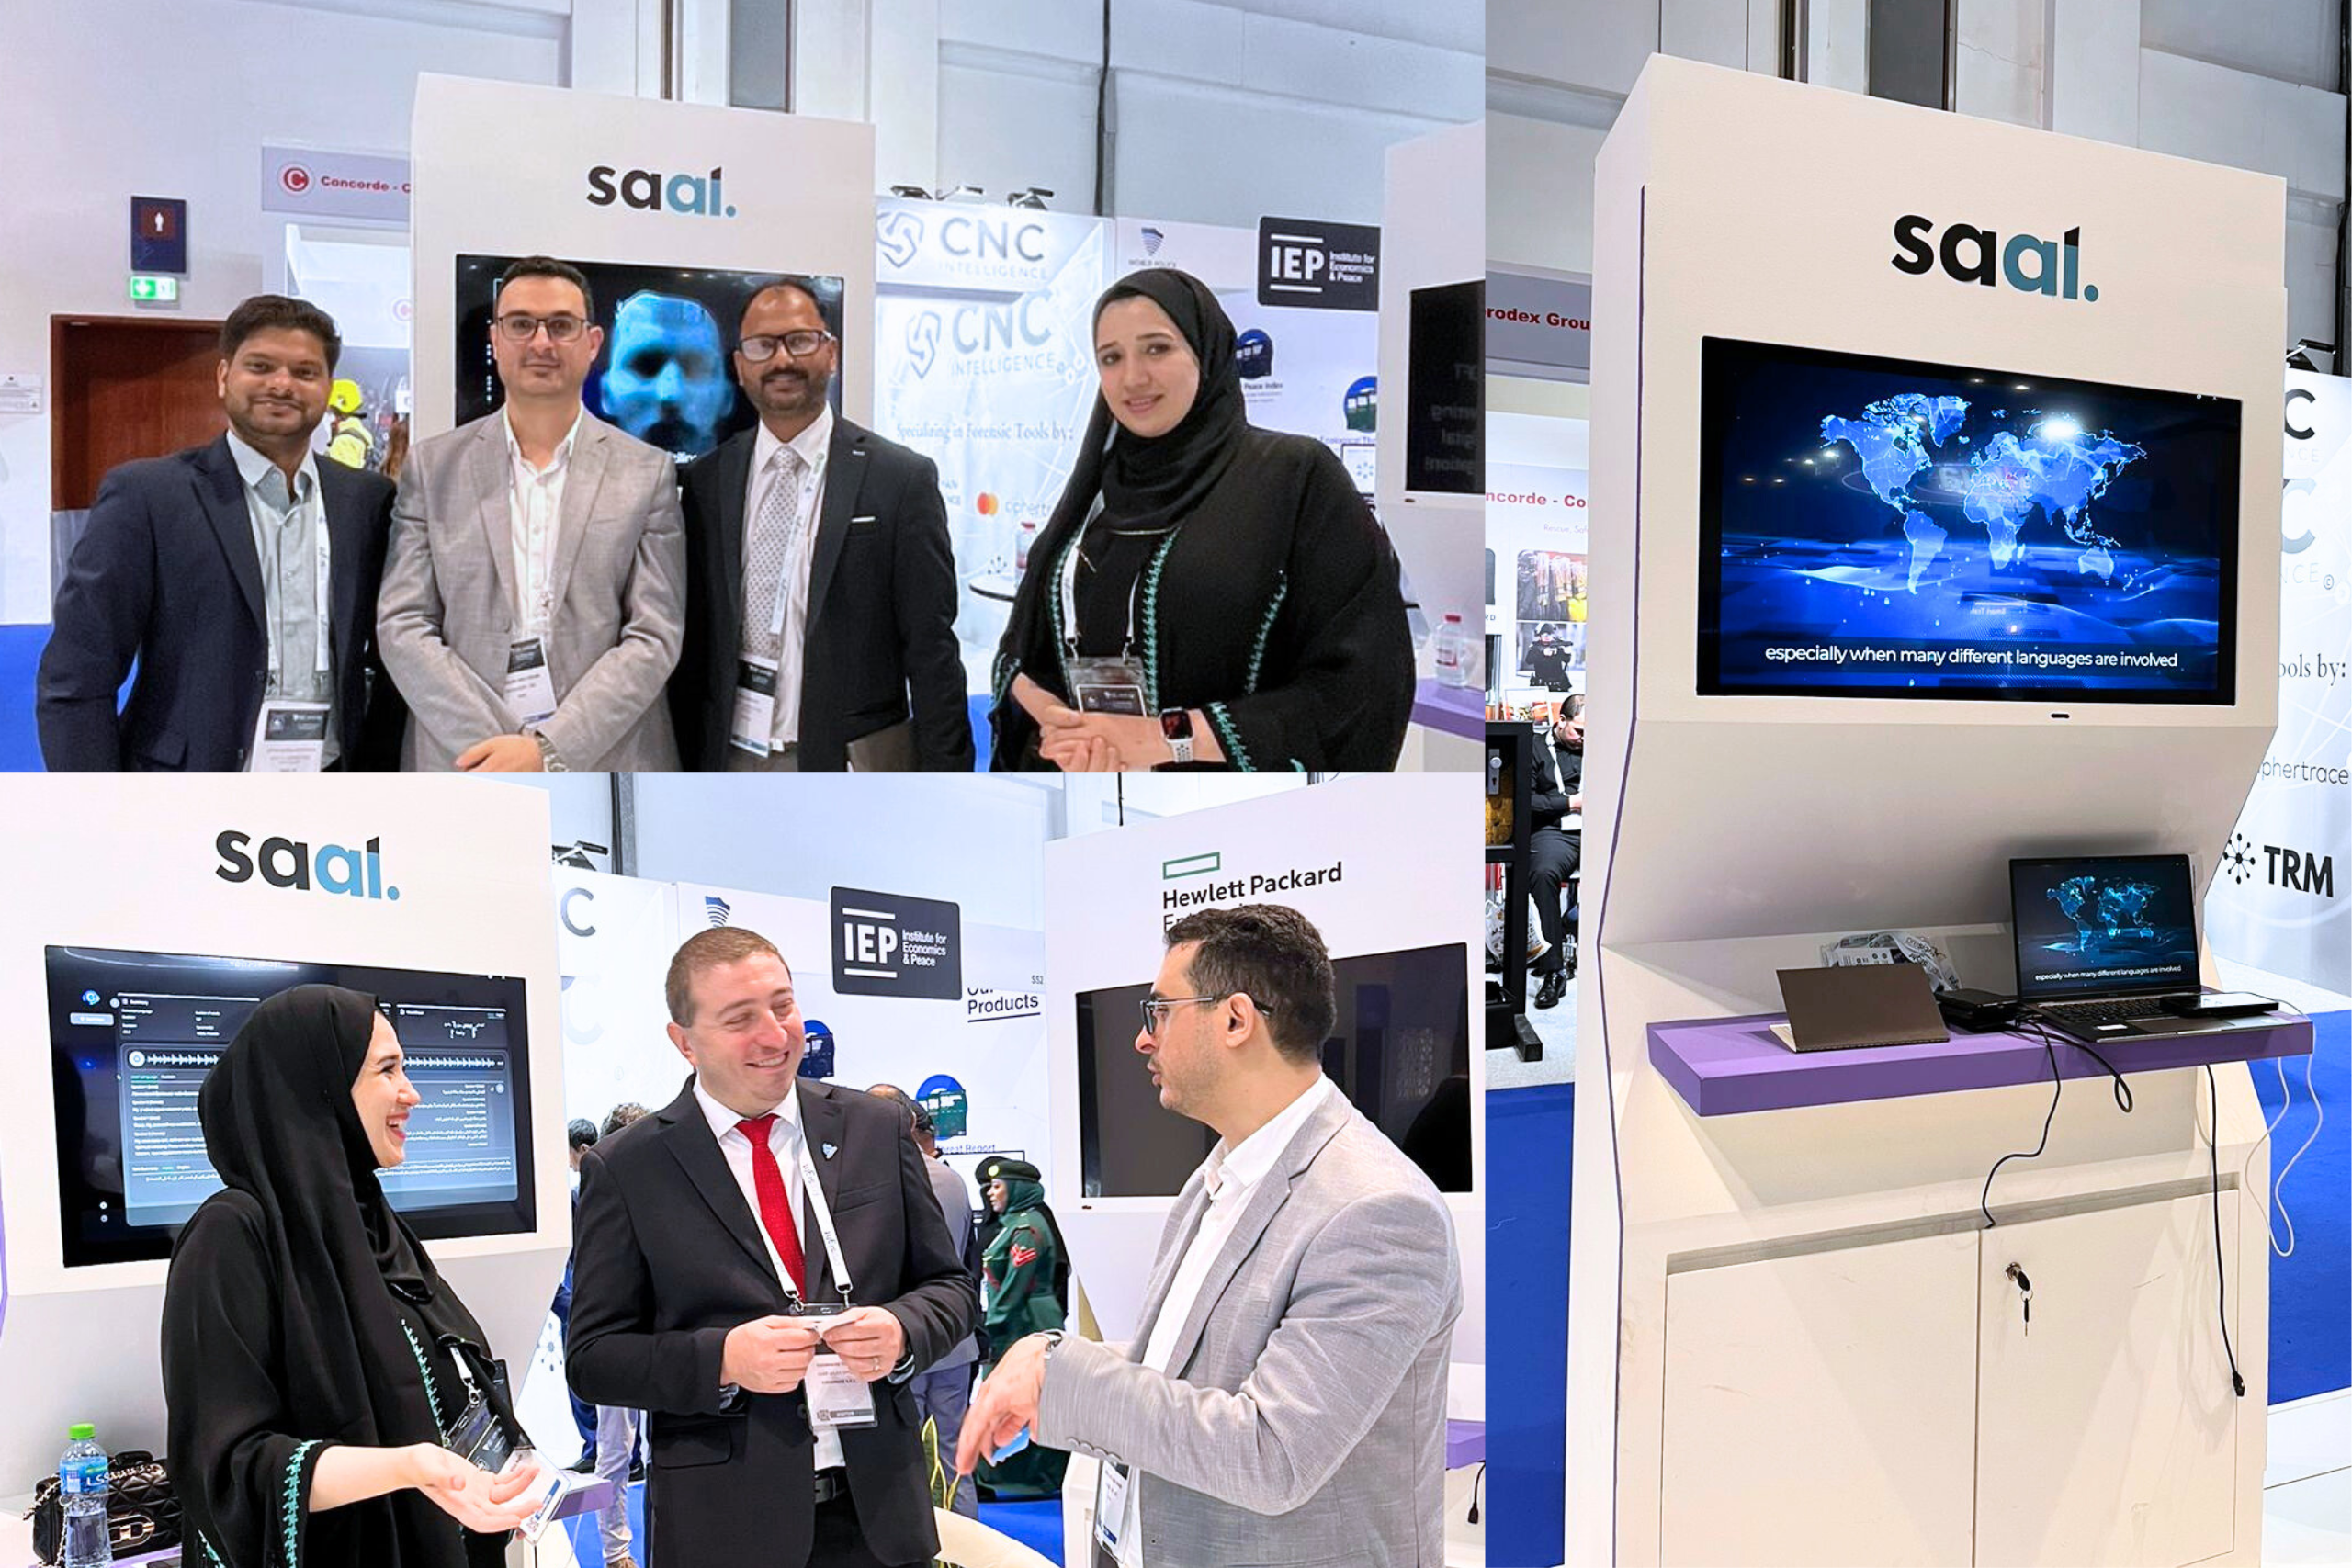 Saal.AI Showcases its innovative AI Solutions for Law Enforcement at the World Police Summit in Dubai